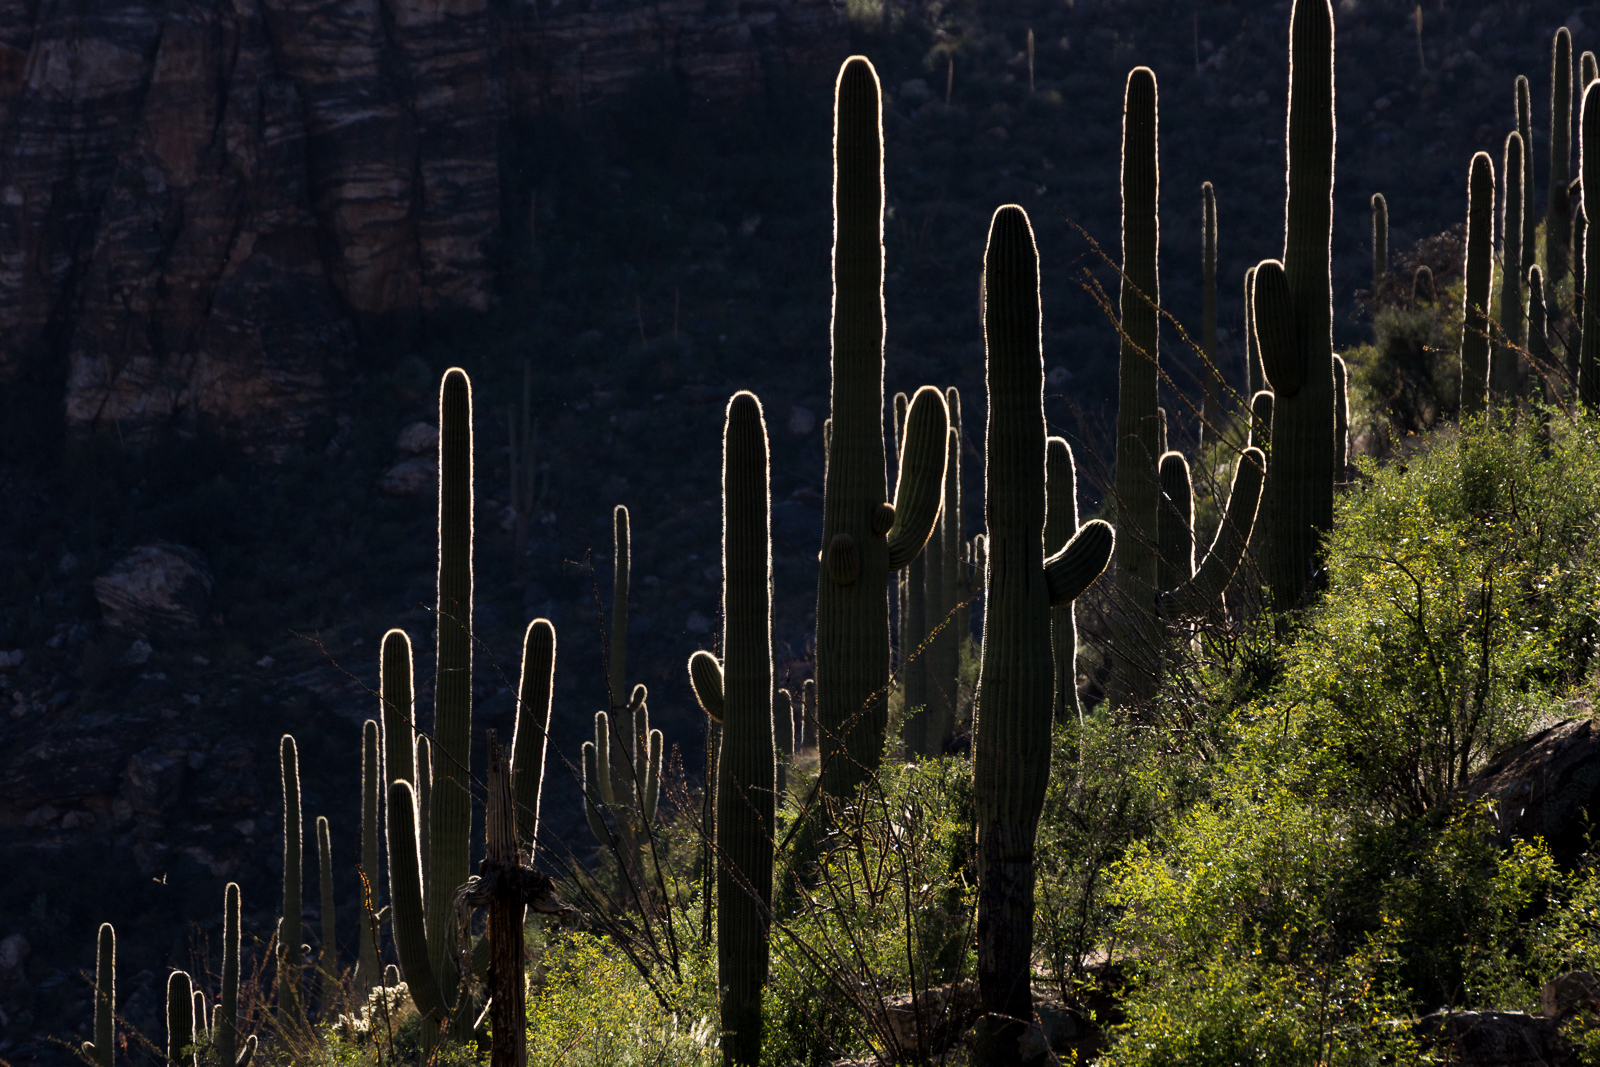 Saguaros in the sunlight - from the Bear Canyon Trail, above Seven Falls. November 2015.